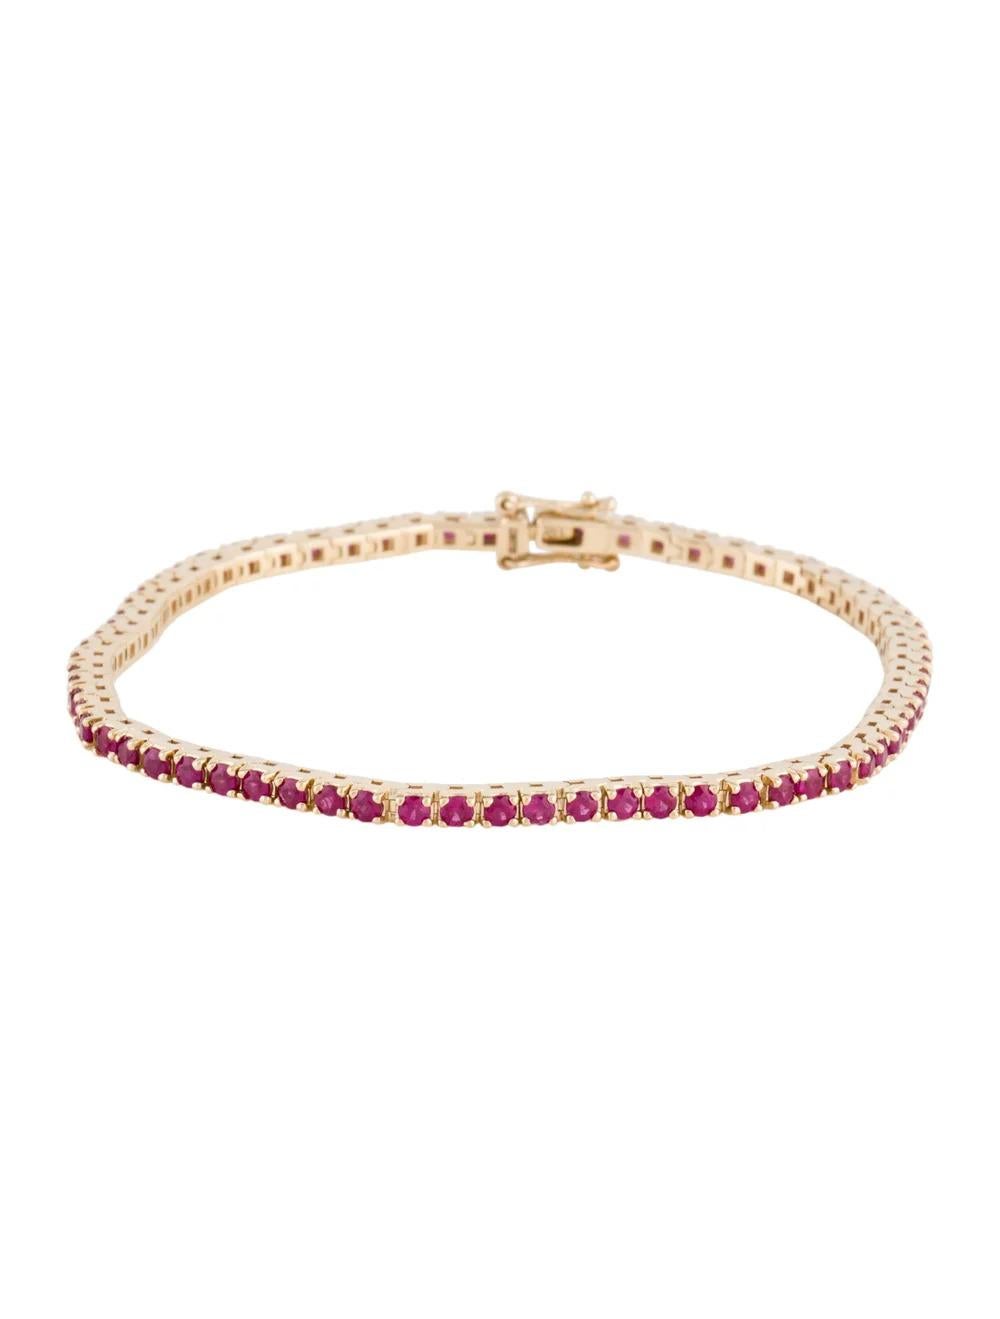 Immerse yourself in the timeless beauty of this captivating 14K Yellow Gold Ruby Link Bracelet, featuring a stunning array of Round Modified Brilliant Rubies. Crafted with meticulous attention to detail, this bracelet exudes elegance and